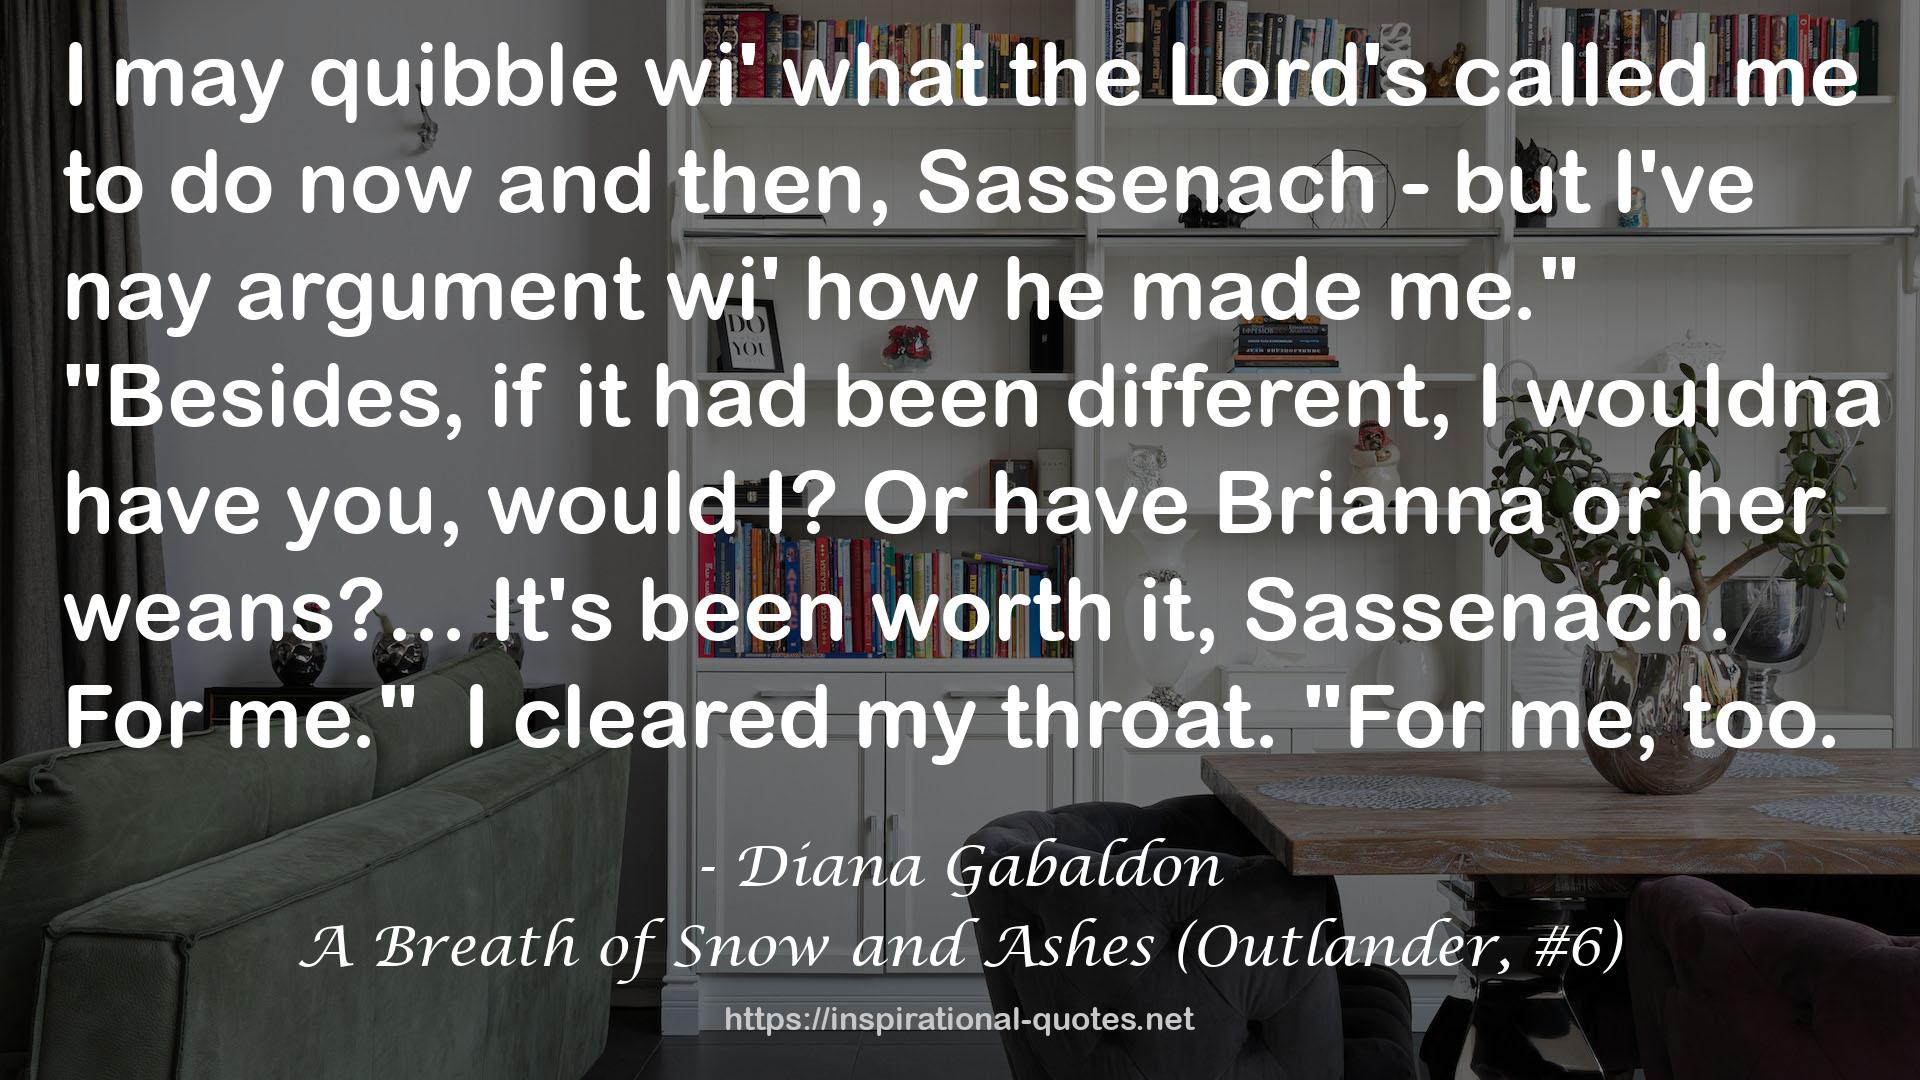 A Breath of Snow and Ashes (Outlander, #6) QUOTES